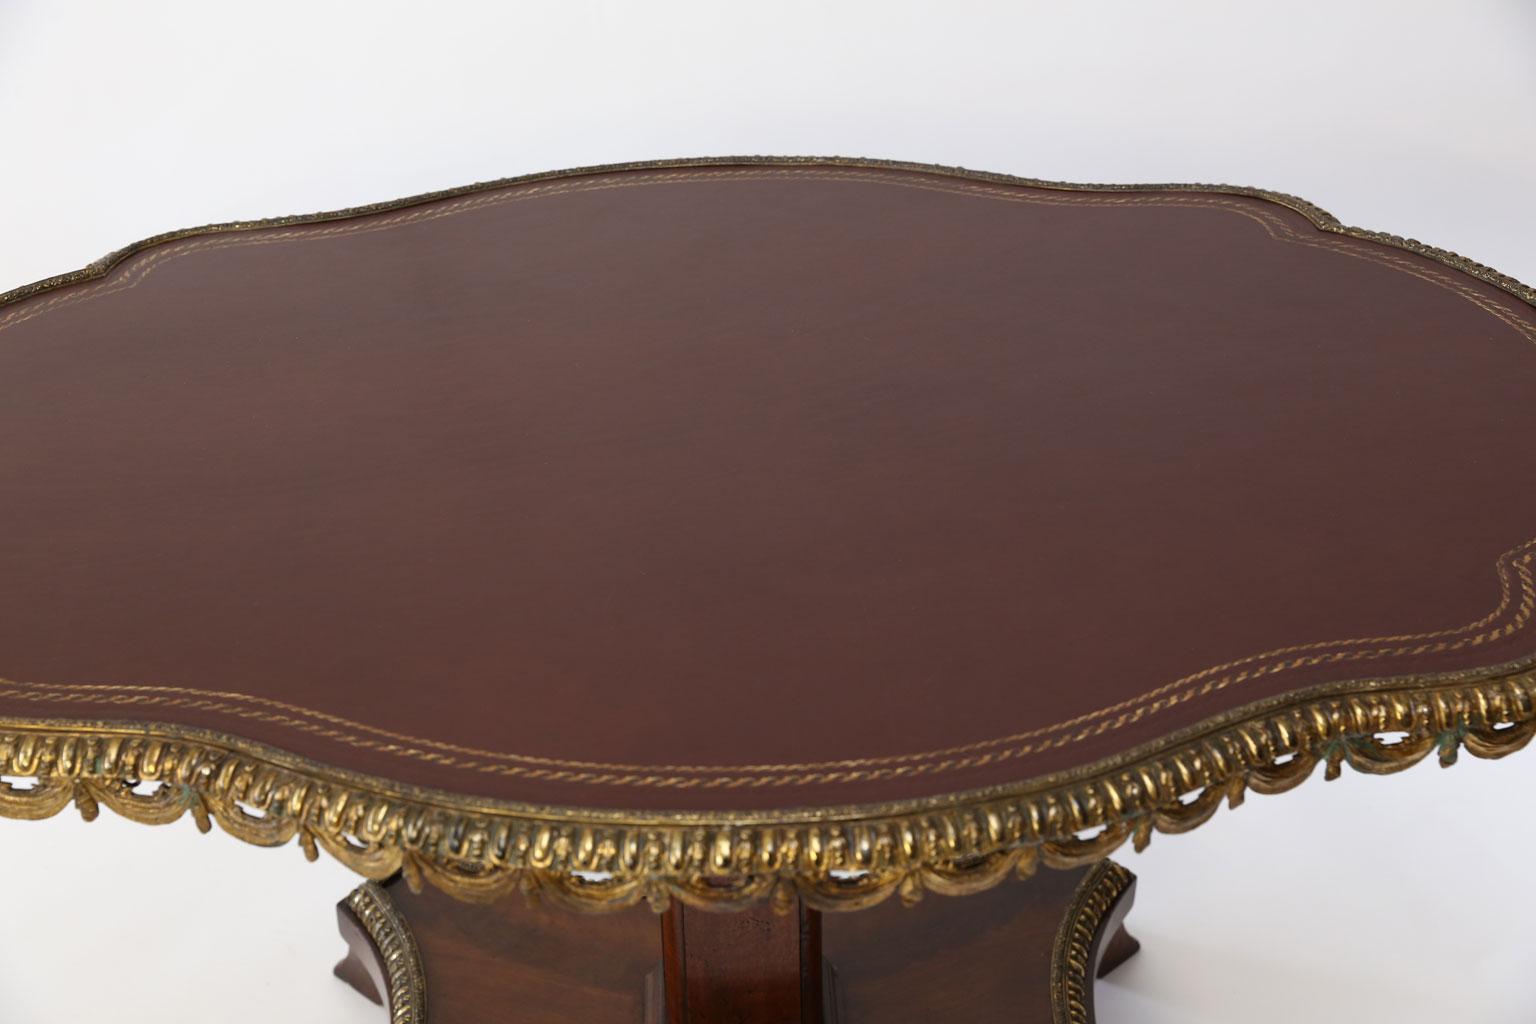 English leather-top center table in now-extinct Cuban mahogany. Leather-covered shaped top surrounded by original mercury-gilt cast brass decorative edge. Leather top is hand-tooled and gilded. Base features matching mercury-gilt cast brass